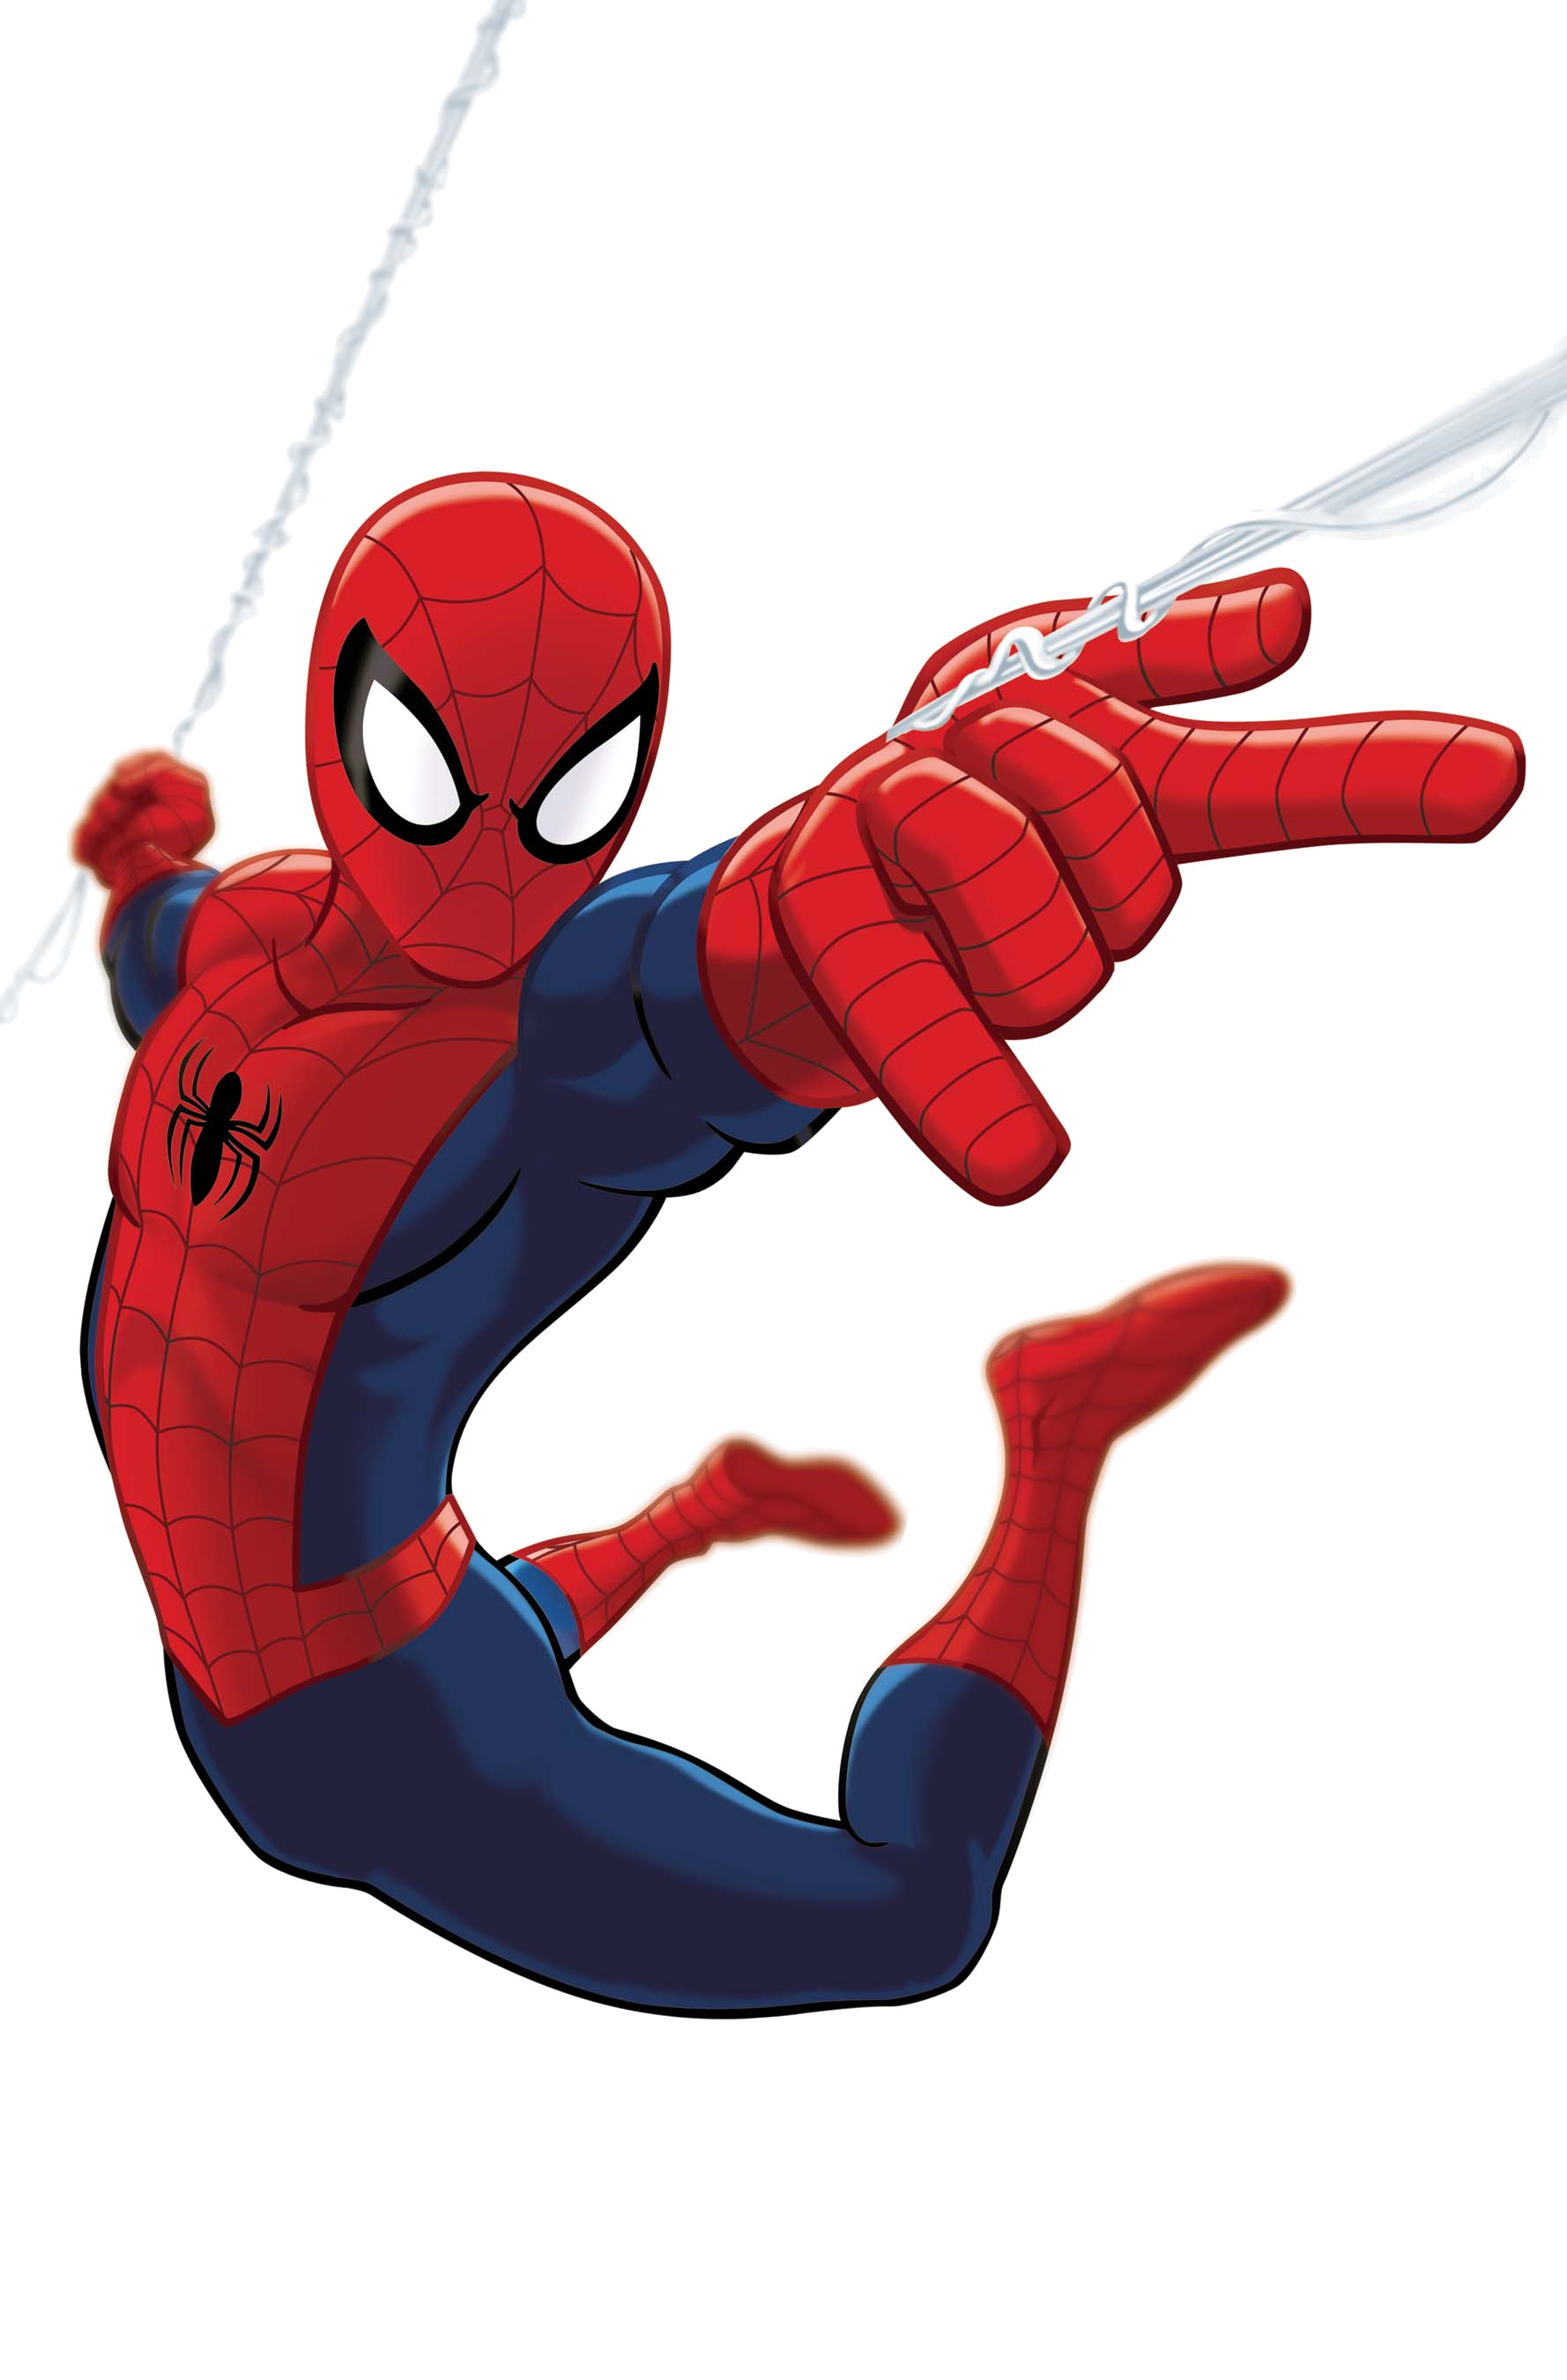 Spider-Man Photo PNG Image